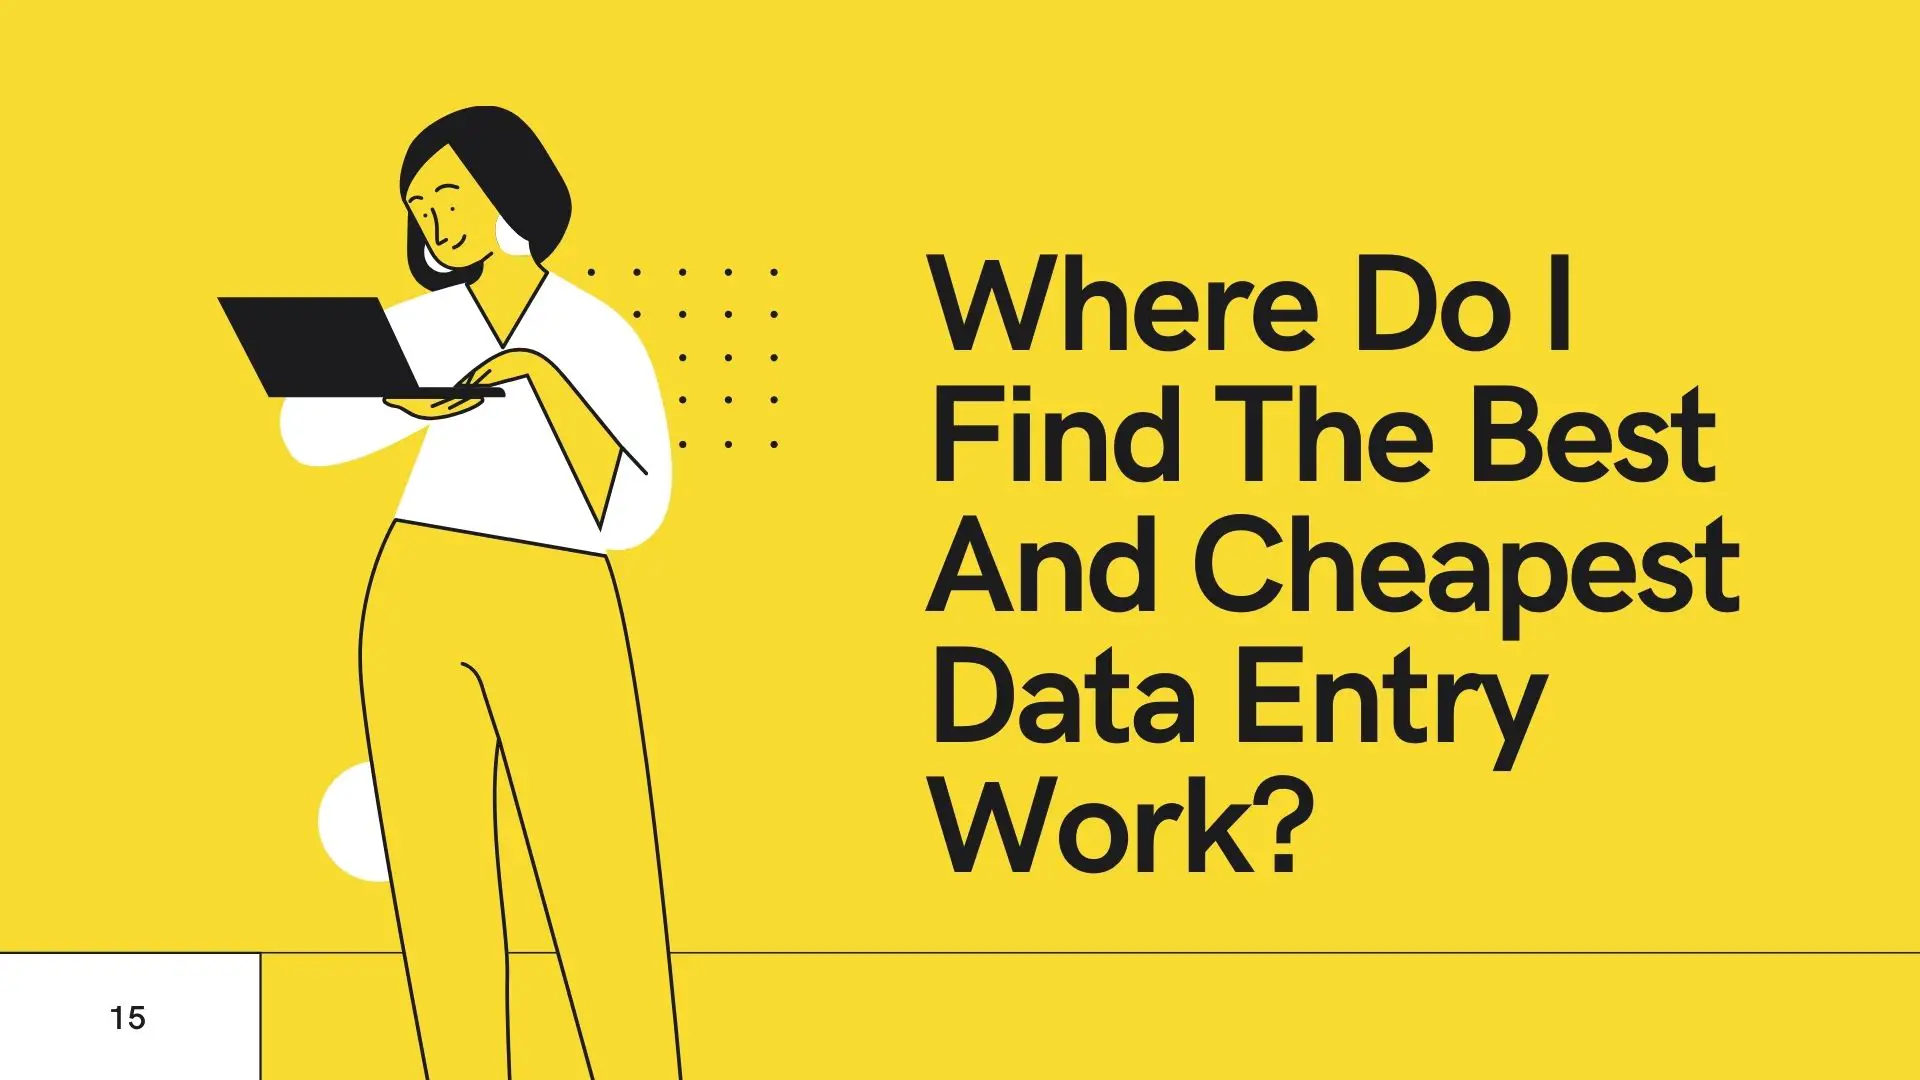 Where Do I Find The Best And Cheapest Data Entry Work?